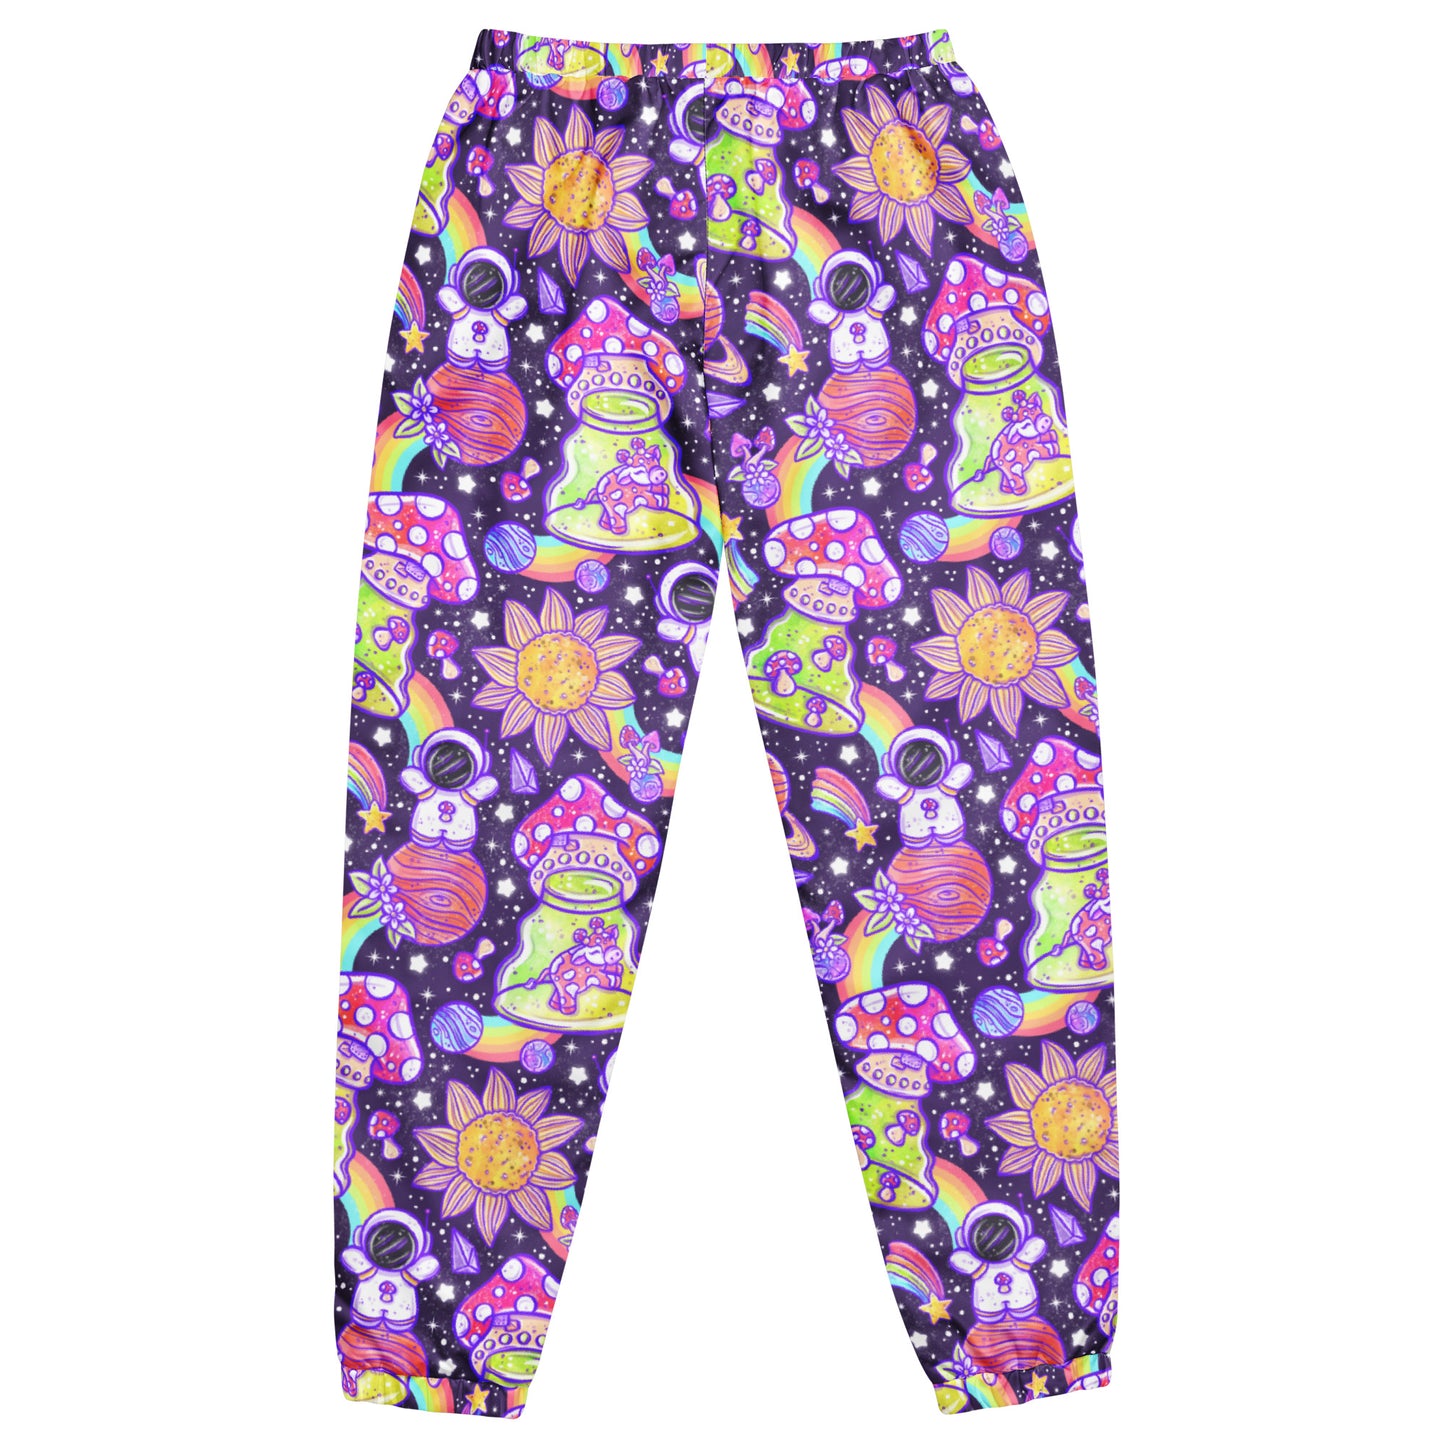 Space Shrooms joggers